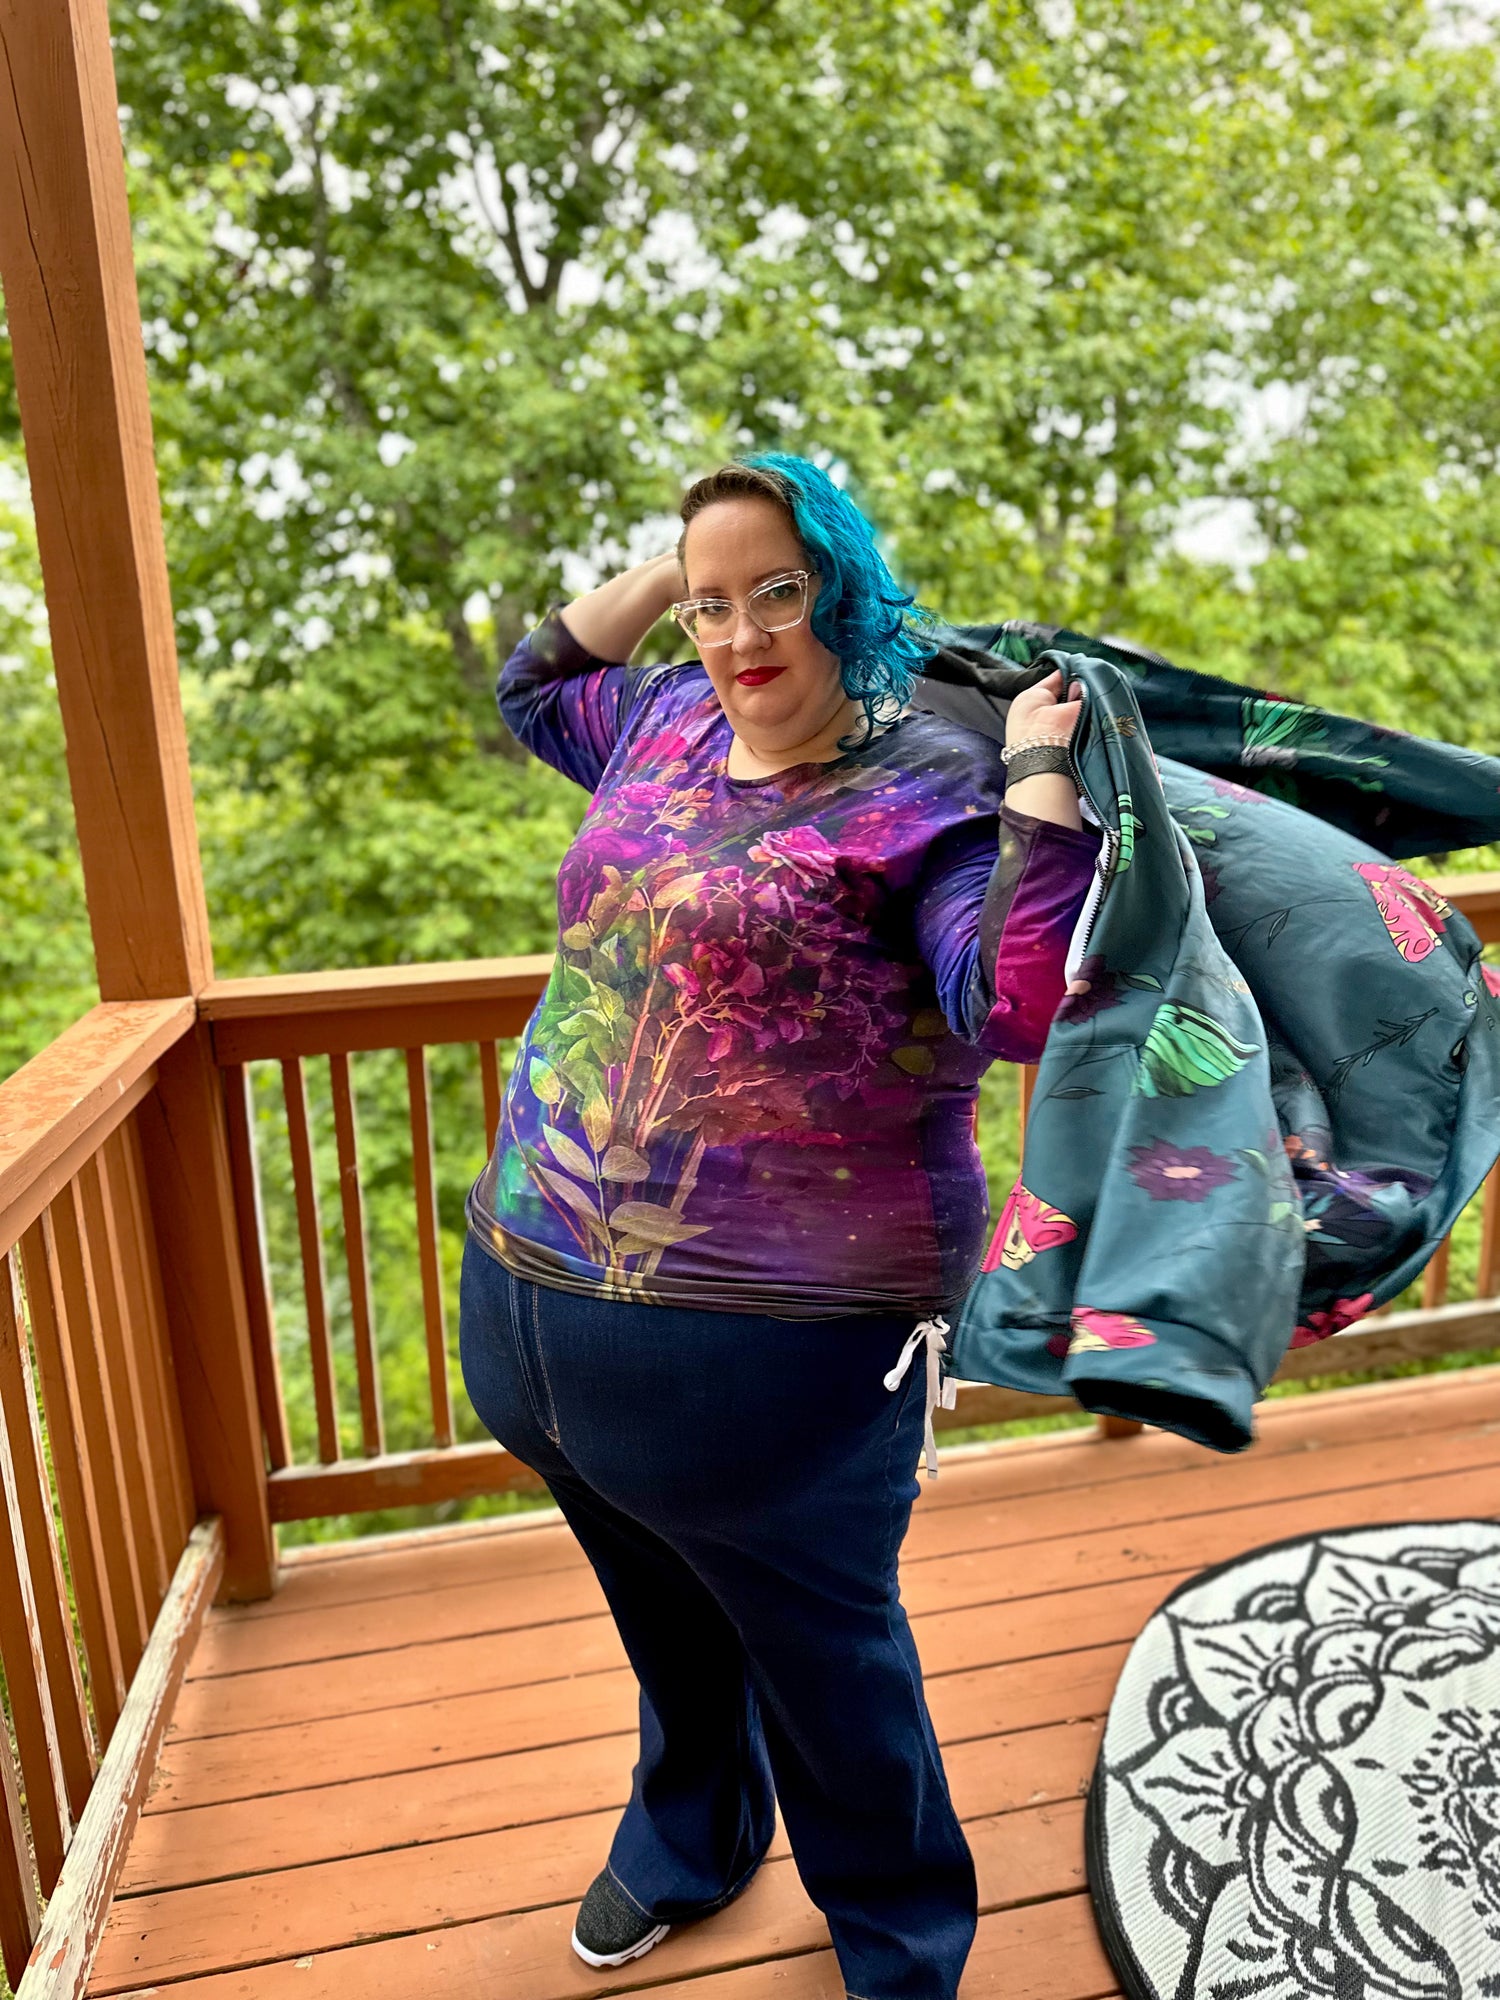 Woman standing on rust orange deck in jeans and a long sleeve shirt with flowers and galaxies. She is putting on a teal hoodie with flowers and winged things on it.